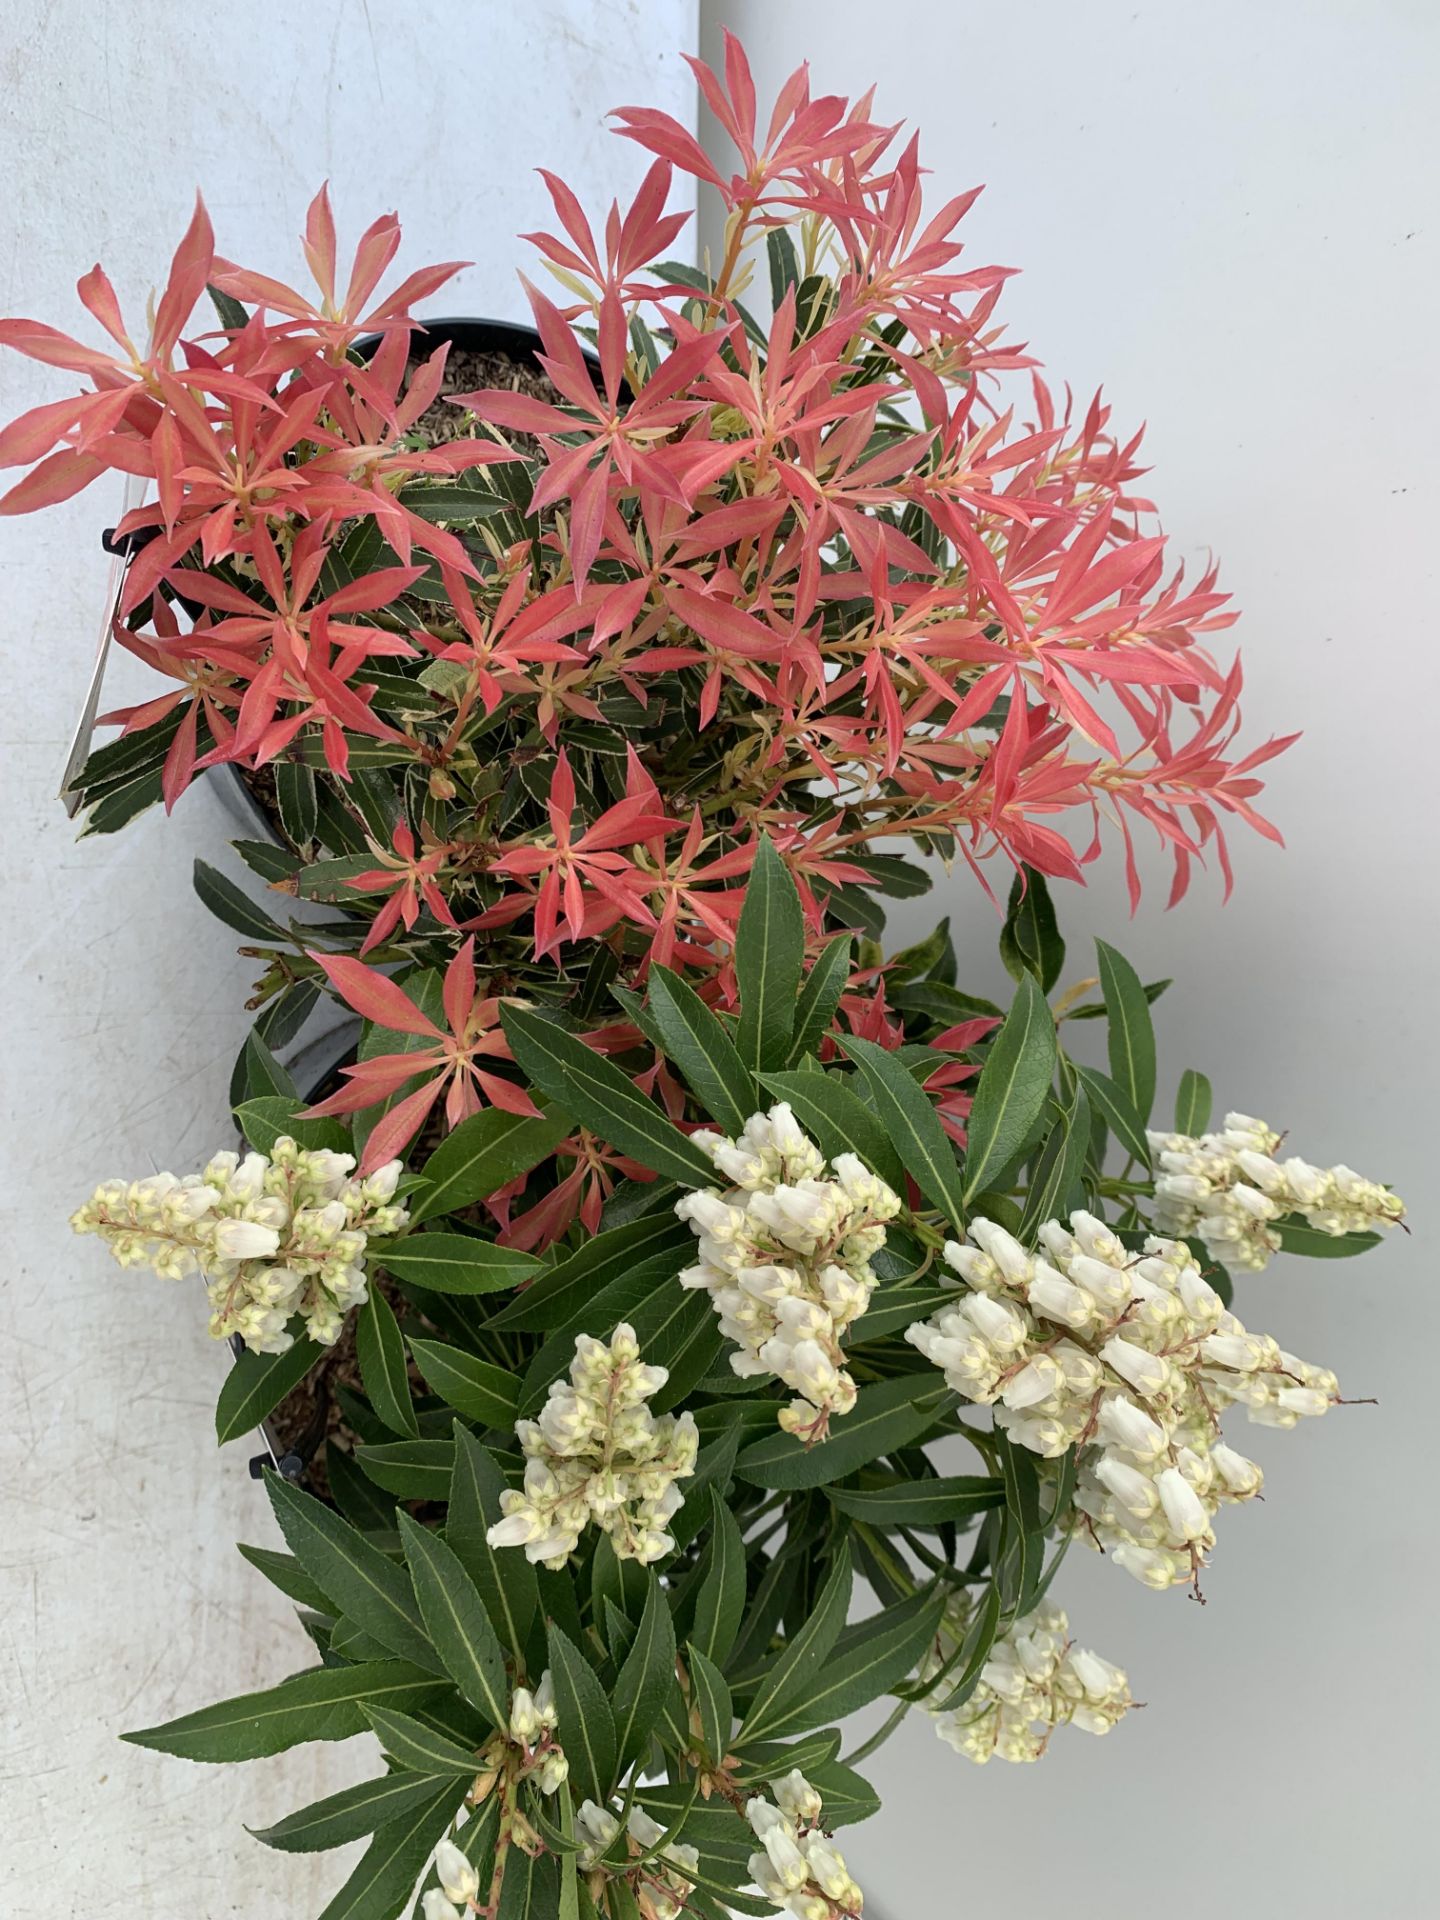 TWO PIERIS JAPONICA FORSET FLAME AND FLAMING SILVER IN 3 LTR POTS 40CM TALL PLUS VAT TO BE SOLD - Image 5 of 12